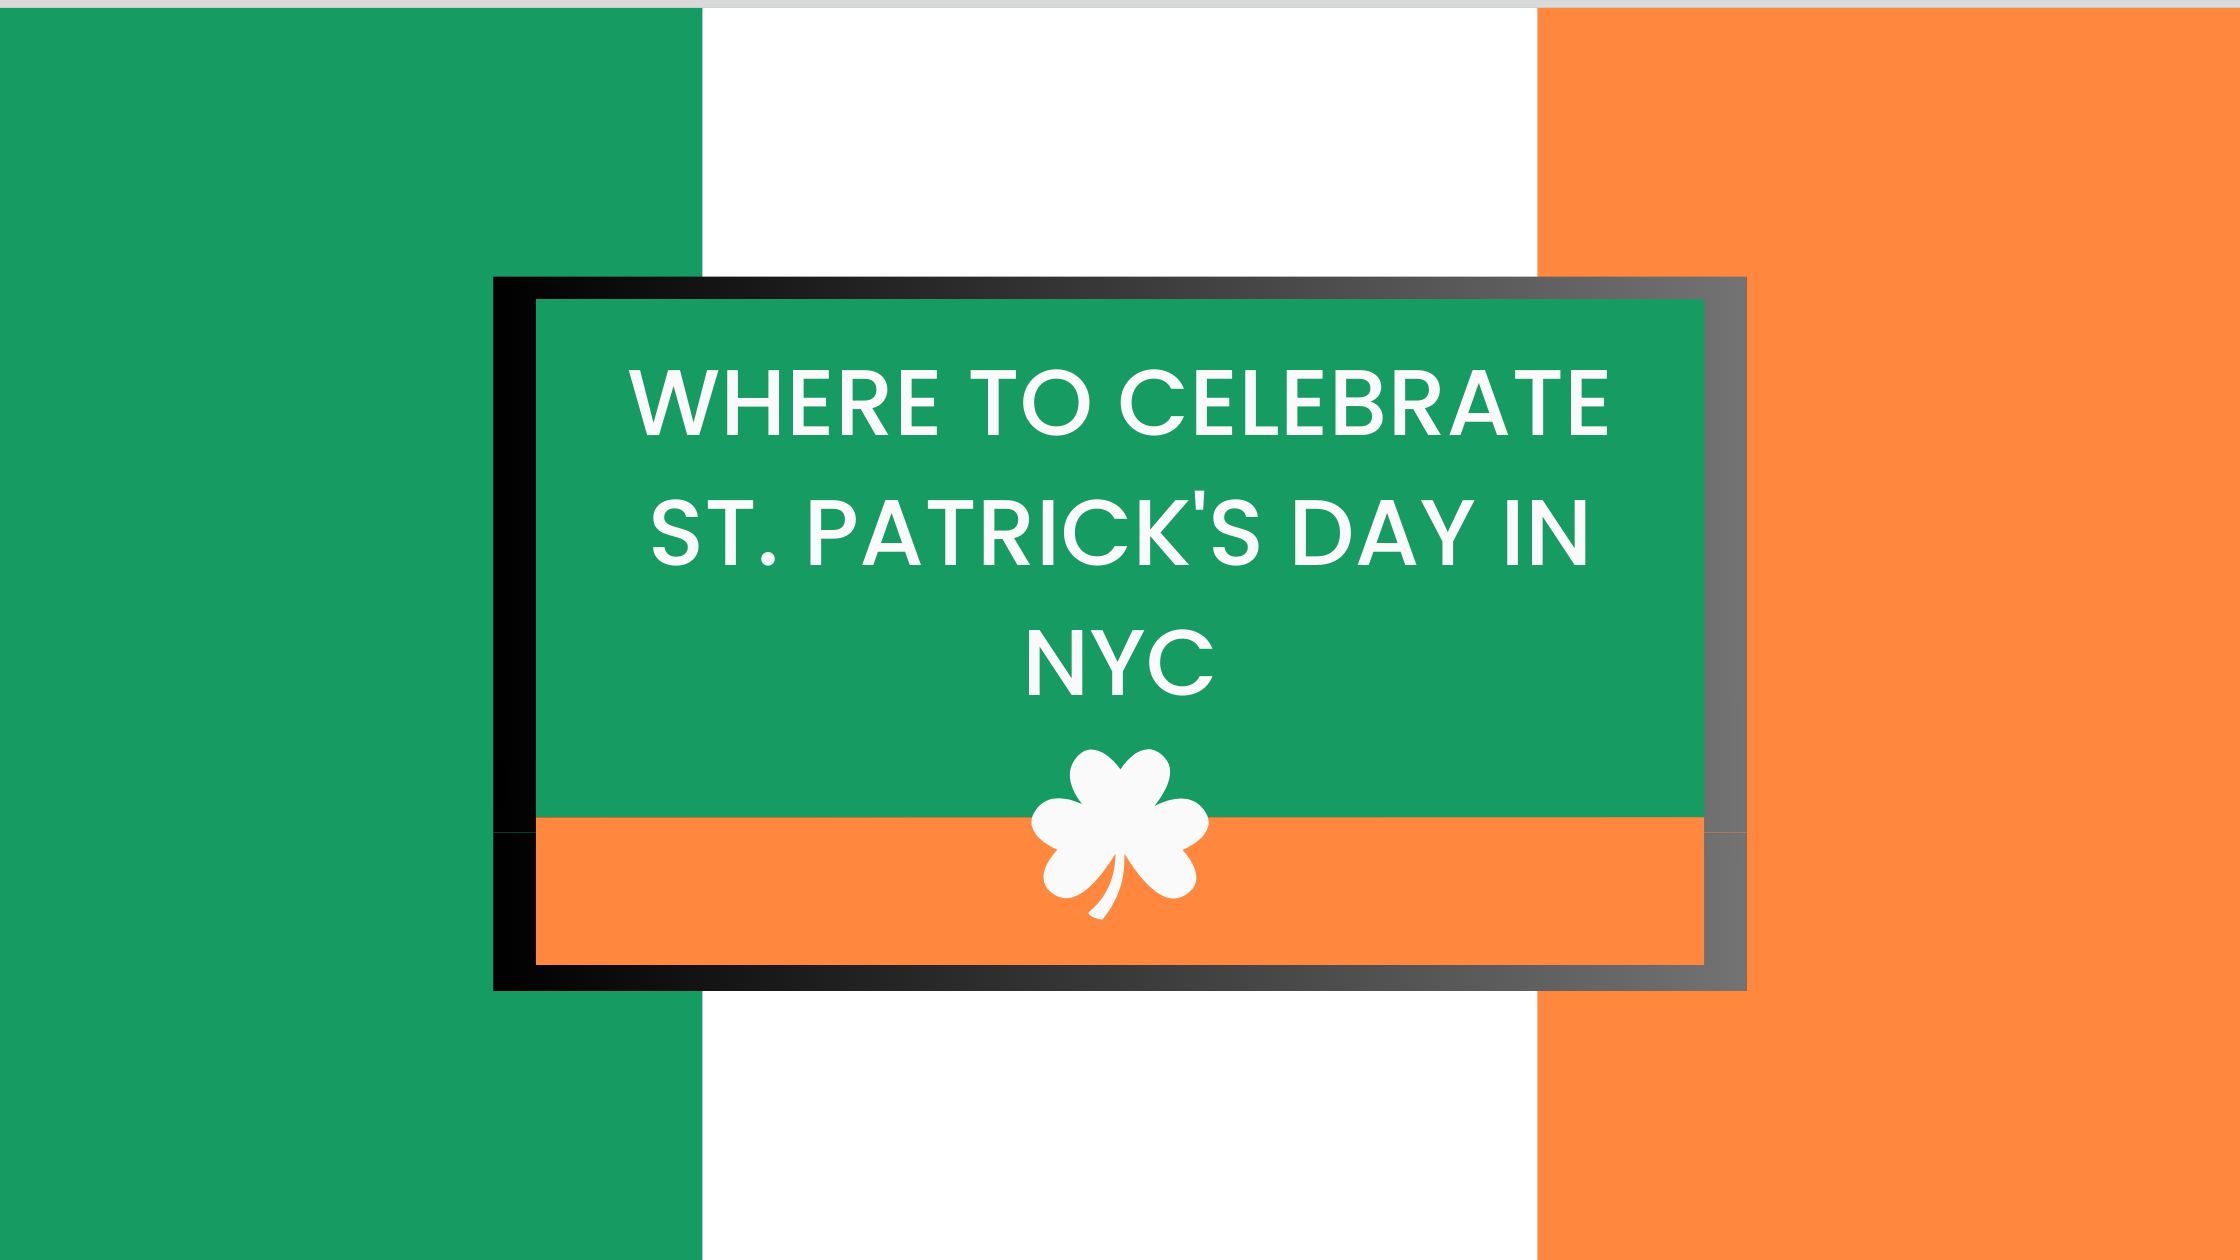 Discover the luck of the Irish in the heart of NYC with where to celebrate St. Patrick’s Day. Uncover the city’s festive and vibrant spots to enjoy the St. Paddy’s spirit. From iconic parades and lively pubs we’ve gathered a few favorites that you’ll enjoy whether you’re a New Yorker or just visiting. 